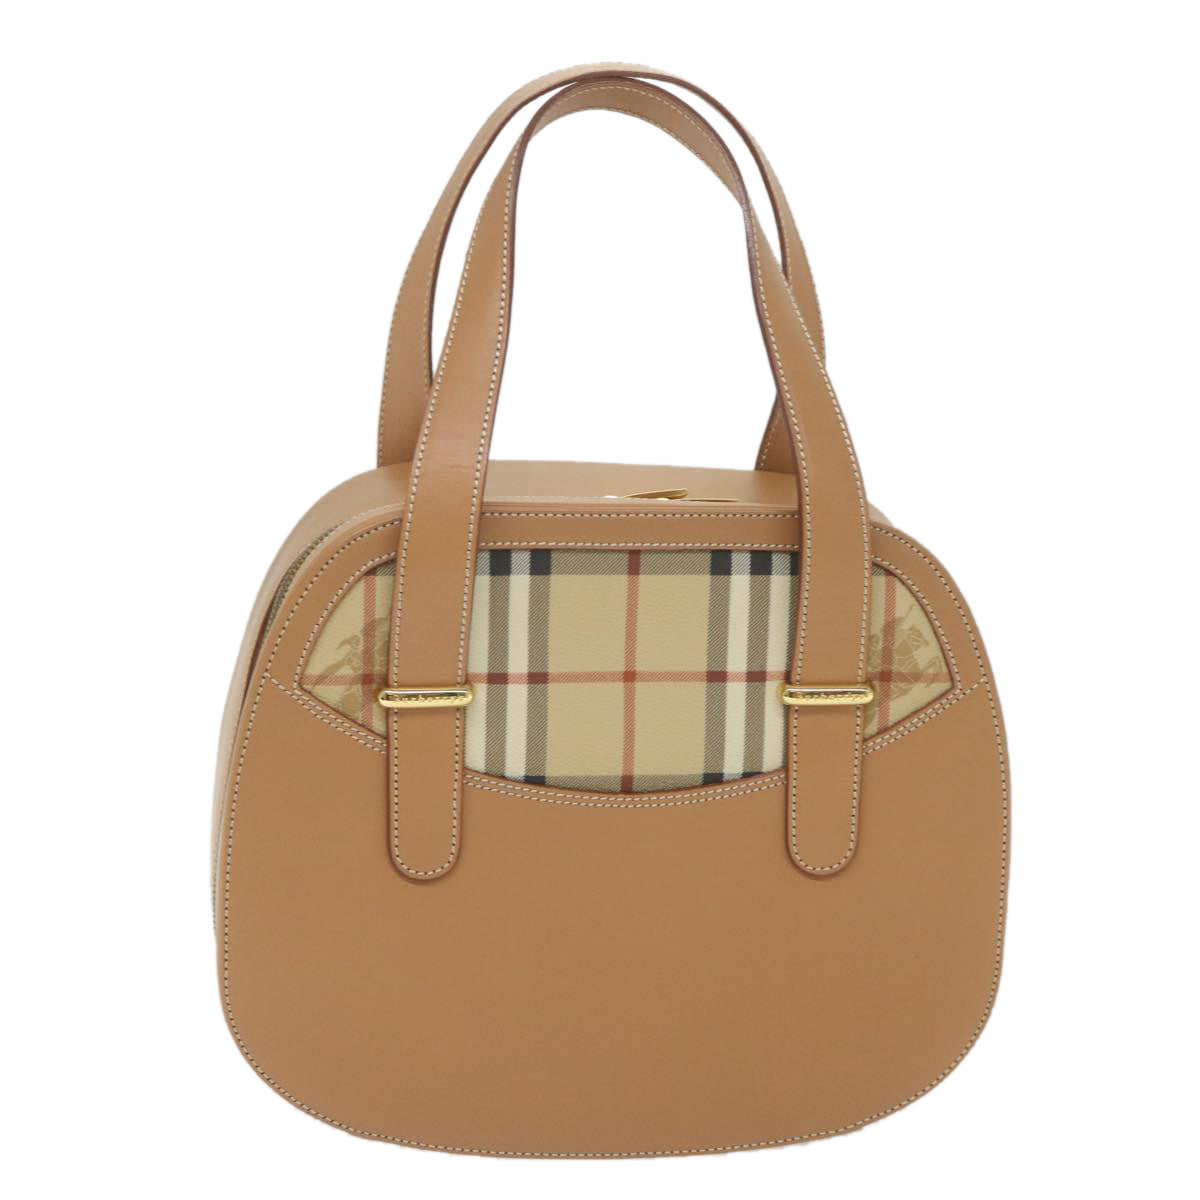 Burberrys Hand Bag Leather Beige Auth 59466